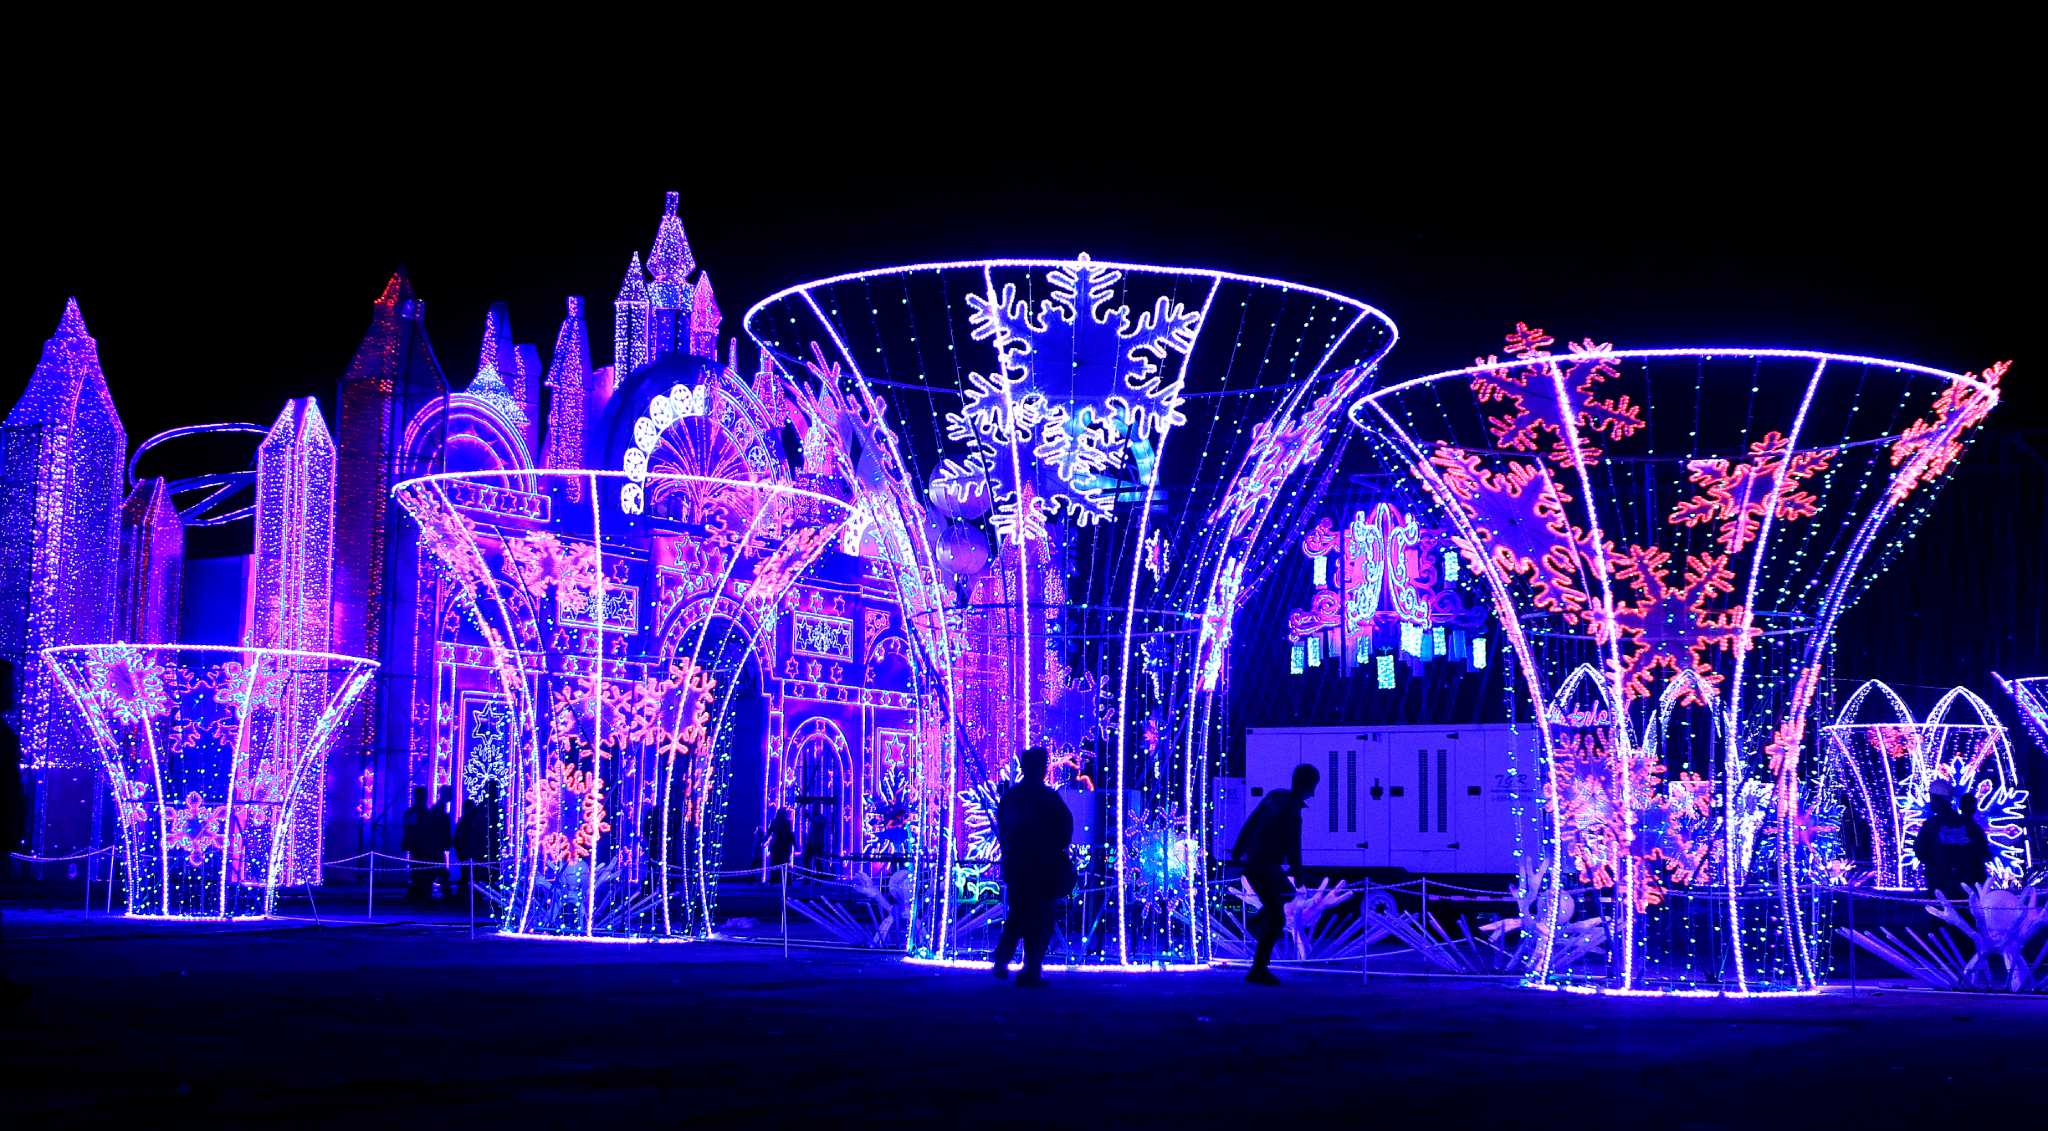 Magical Winter Lights brings world to evening festival